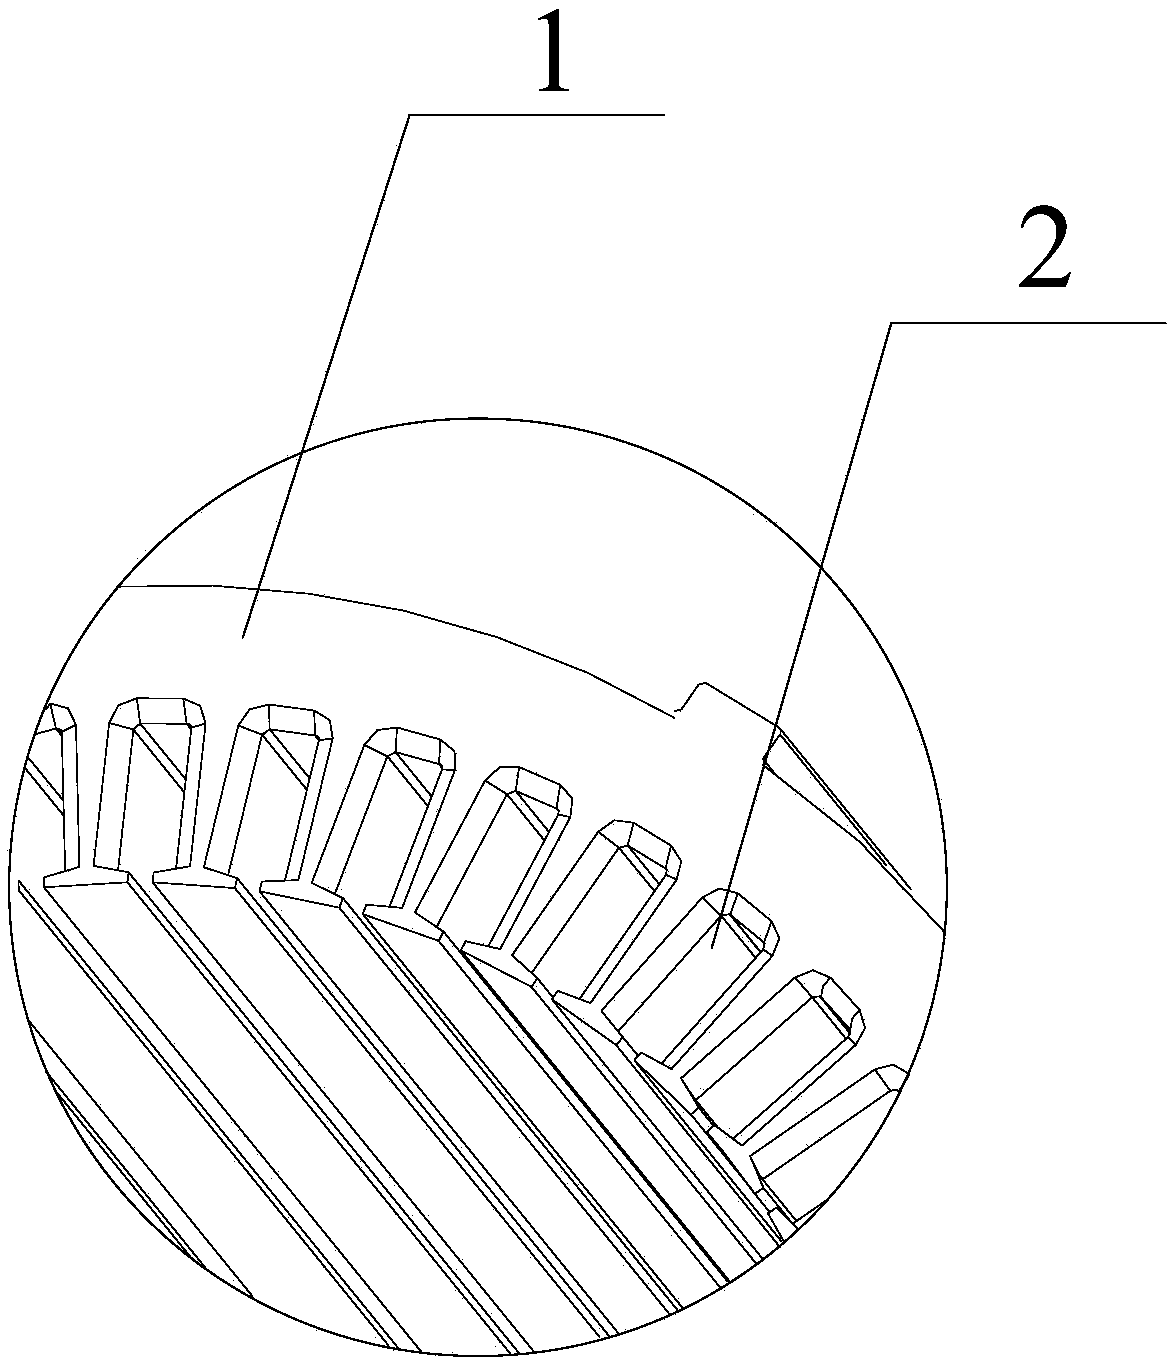 Motor stator groove opening structure